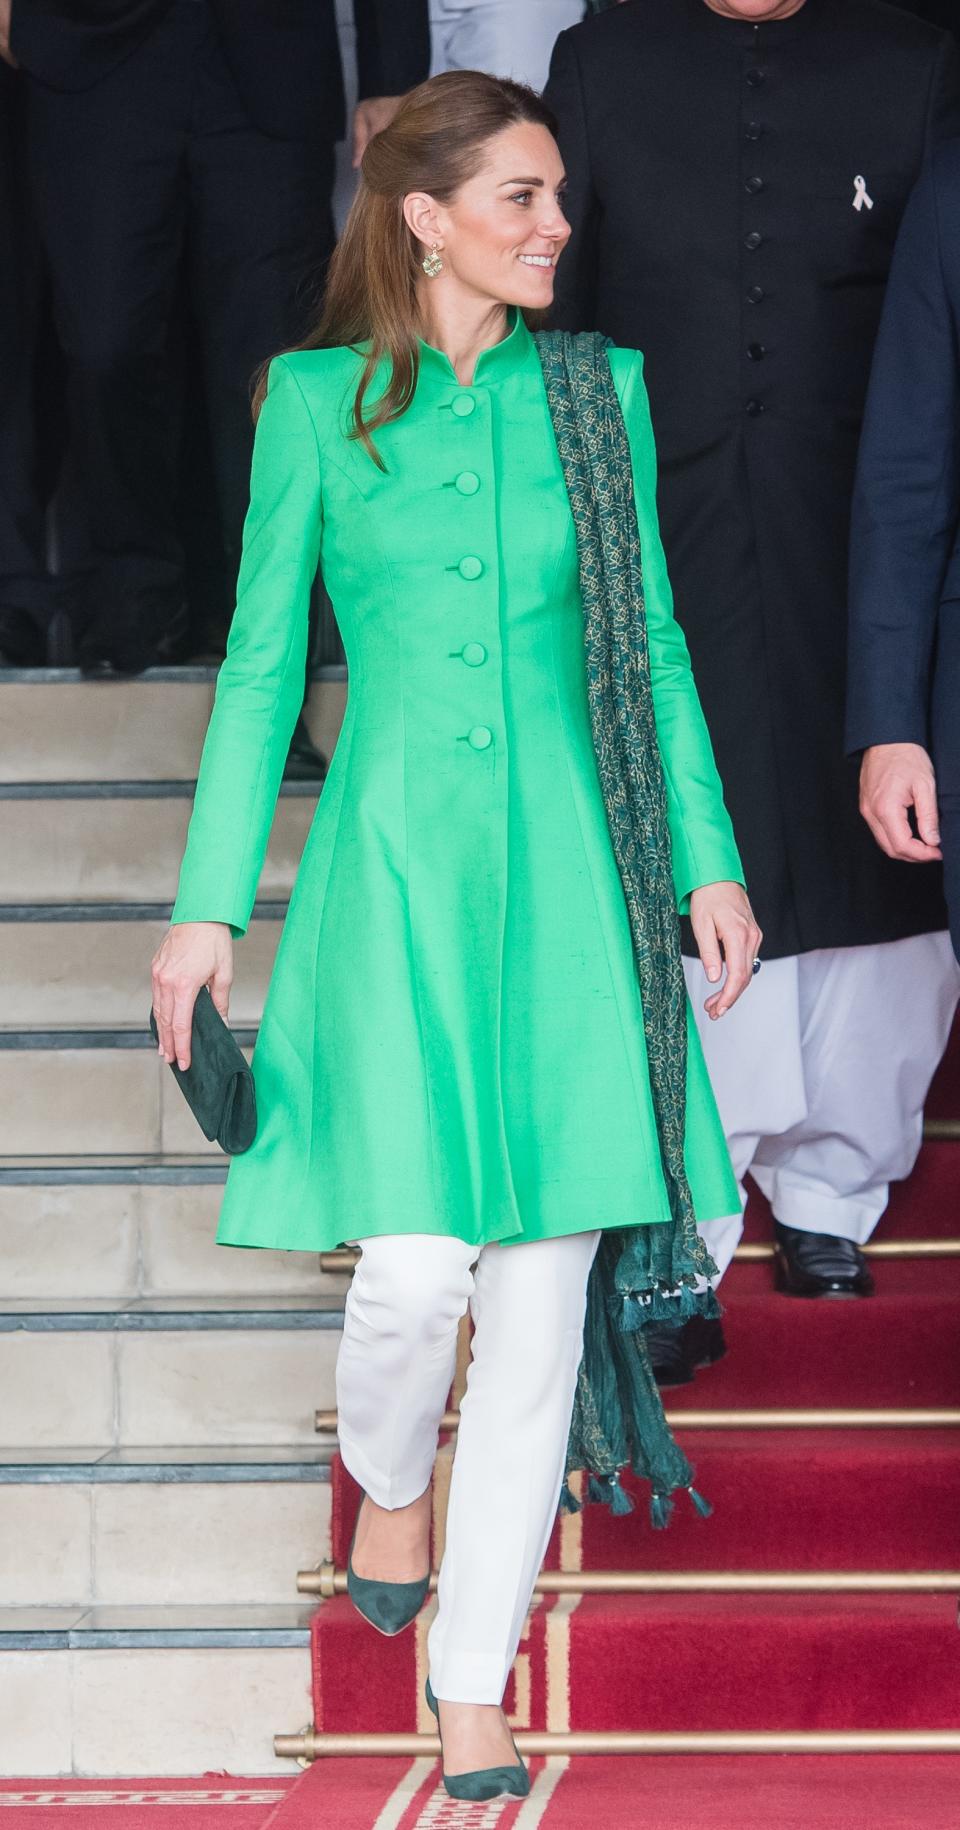 Every Outfit Kate Middleton Wore on Her Royal Tour of Pakistan With Prince William